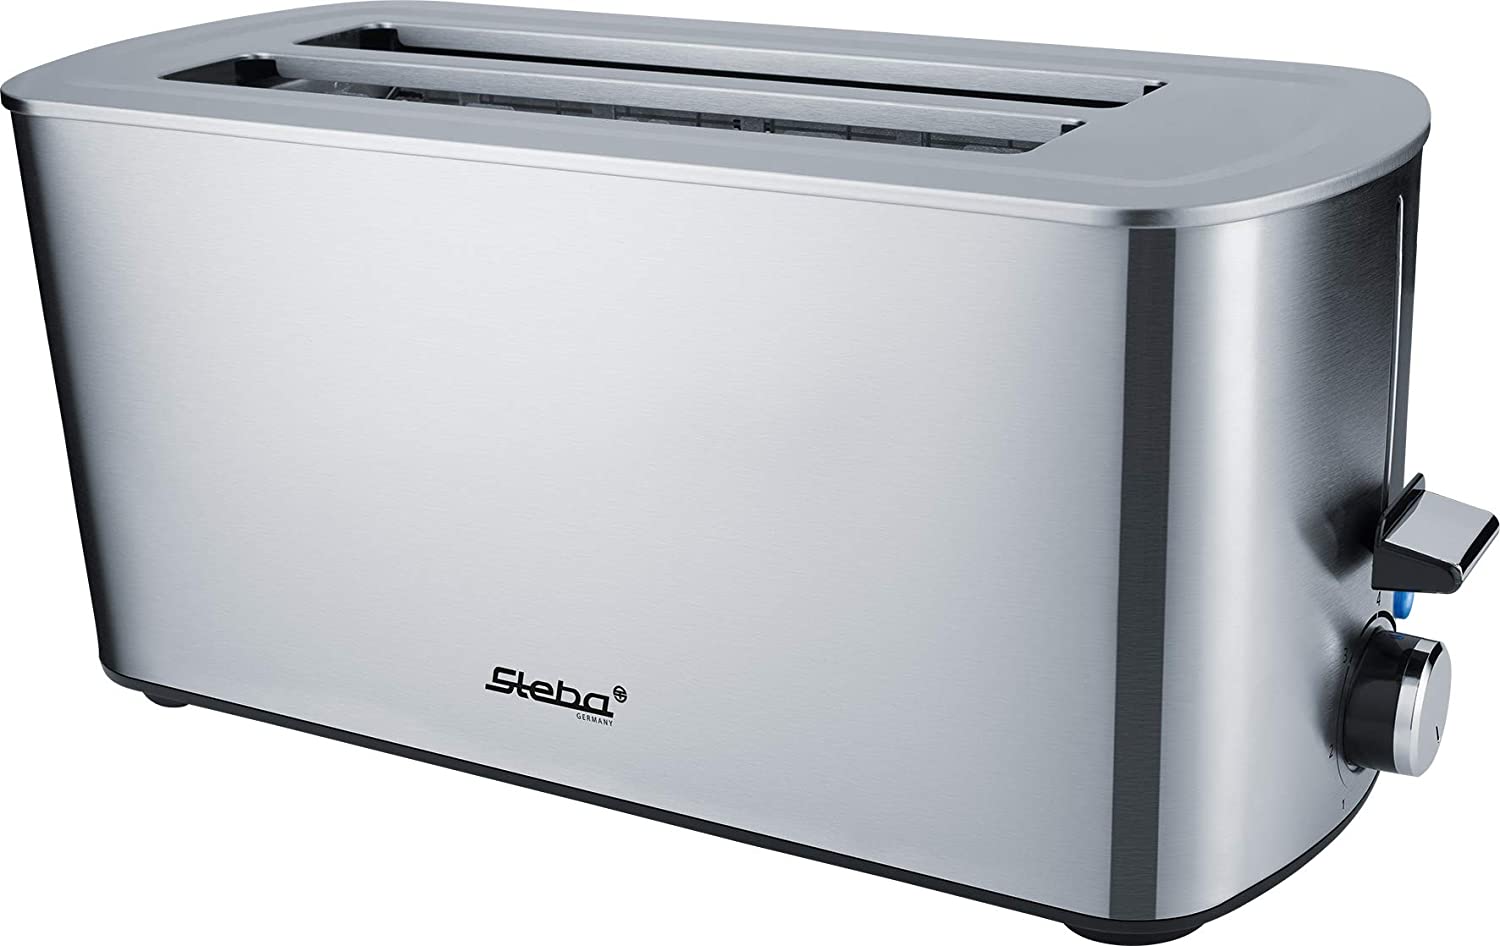 Steba Automatic long-slot toaster TO 21 stainless steel | for 4 slices of toast | anti-fingerprint housing | 7 browning levels adjustable | 4 functions: toasting, defrosting, warming, stopping